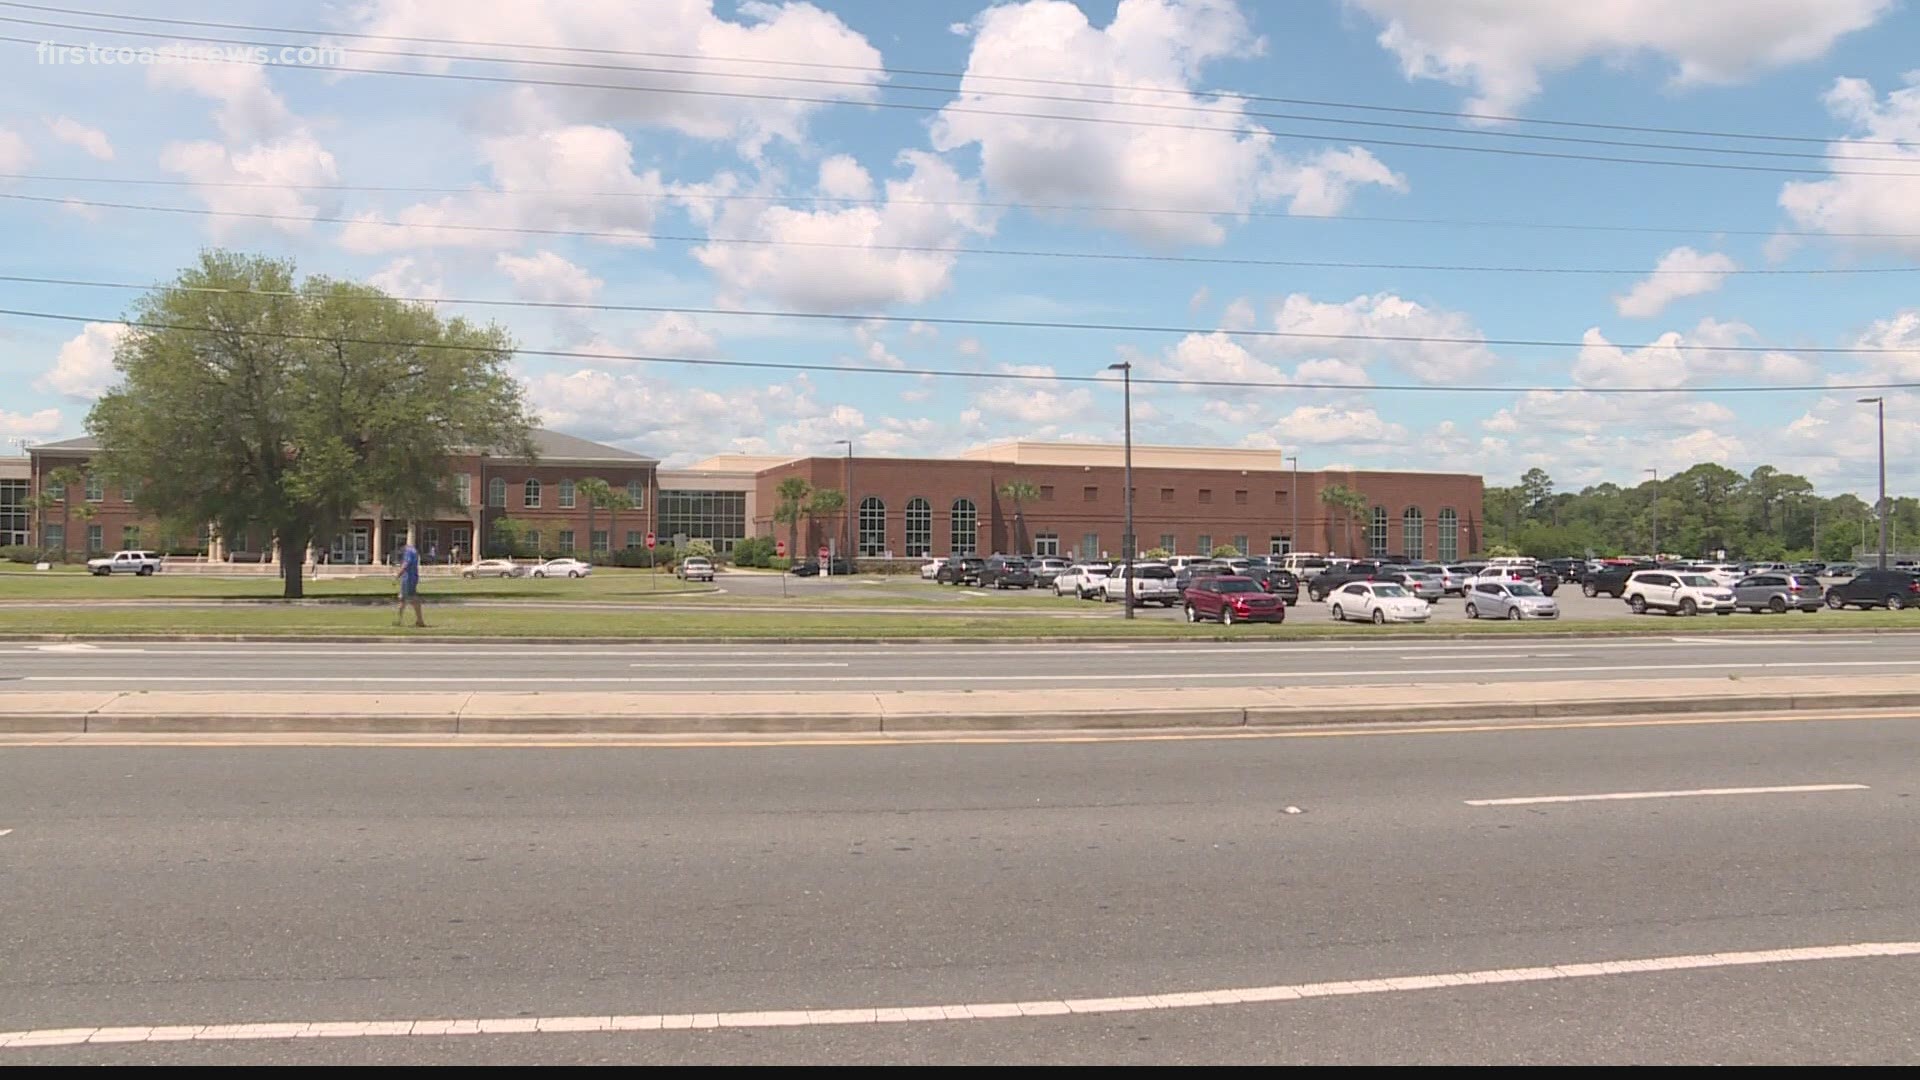 The Glynn County School District said an investigation is underway at Brunswick High School, where a student was stabbed during a fight with another student.